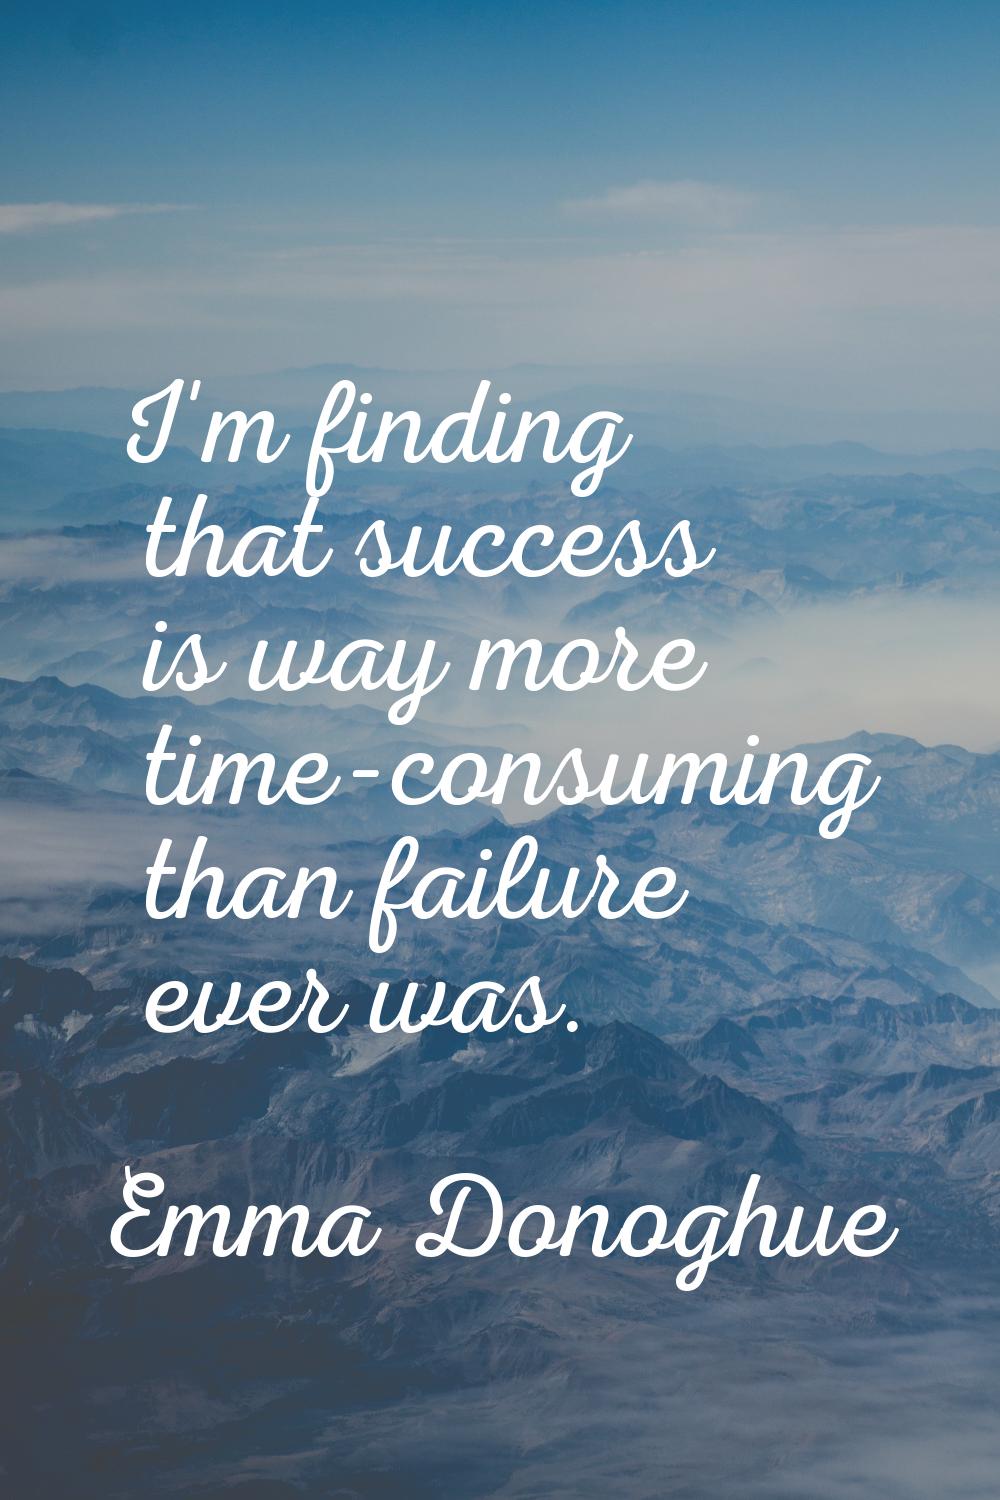 I'm finding that success is way more time-consuming than failure ever was.